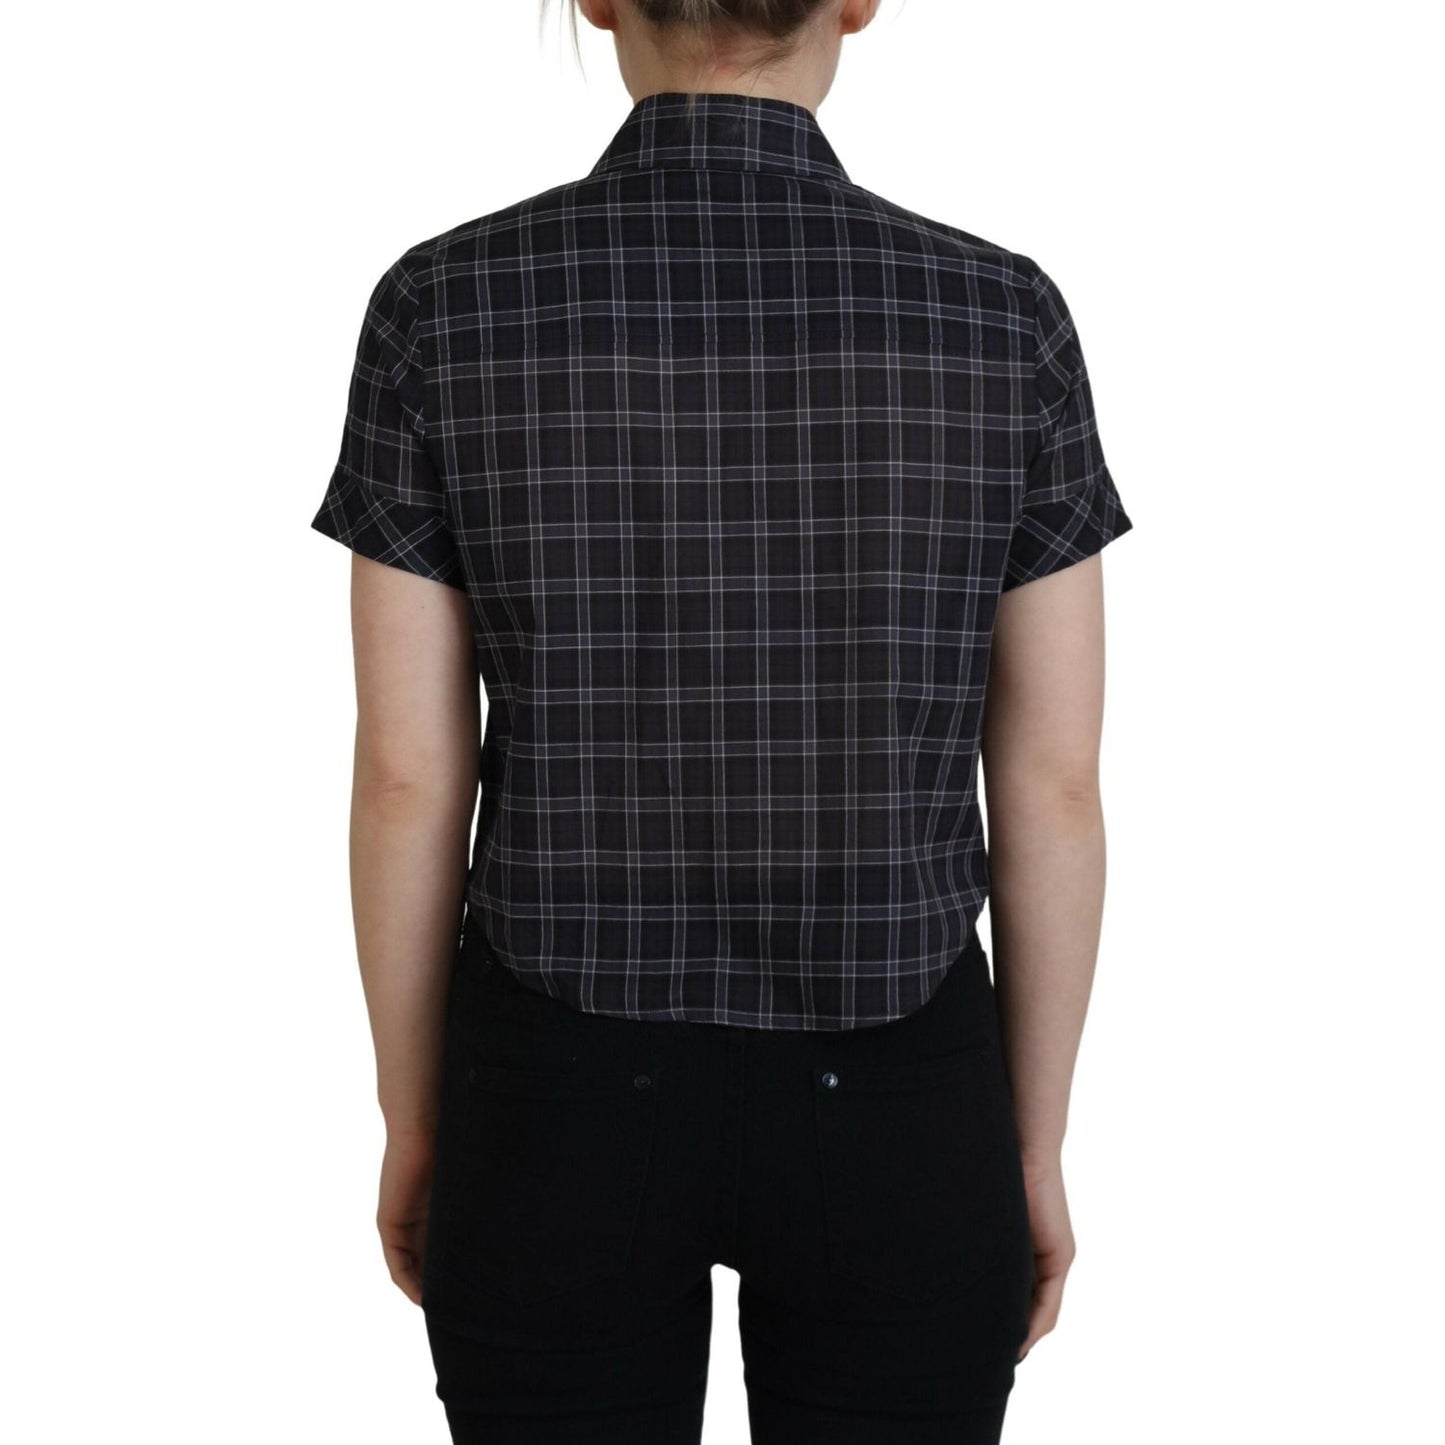 Dsquared² Black Checkered Collared Button Short Sleeves Top black-checkered-collared-button-short-sleeves-top